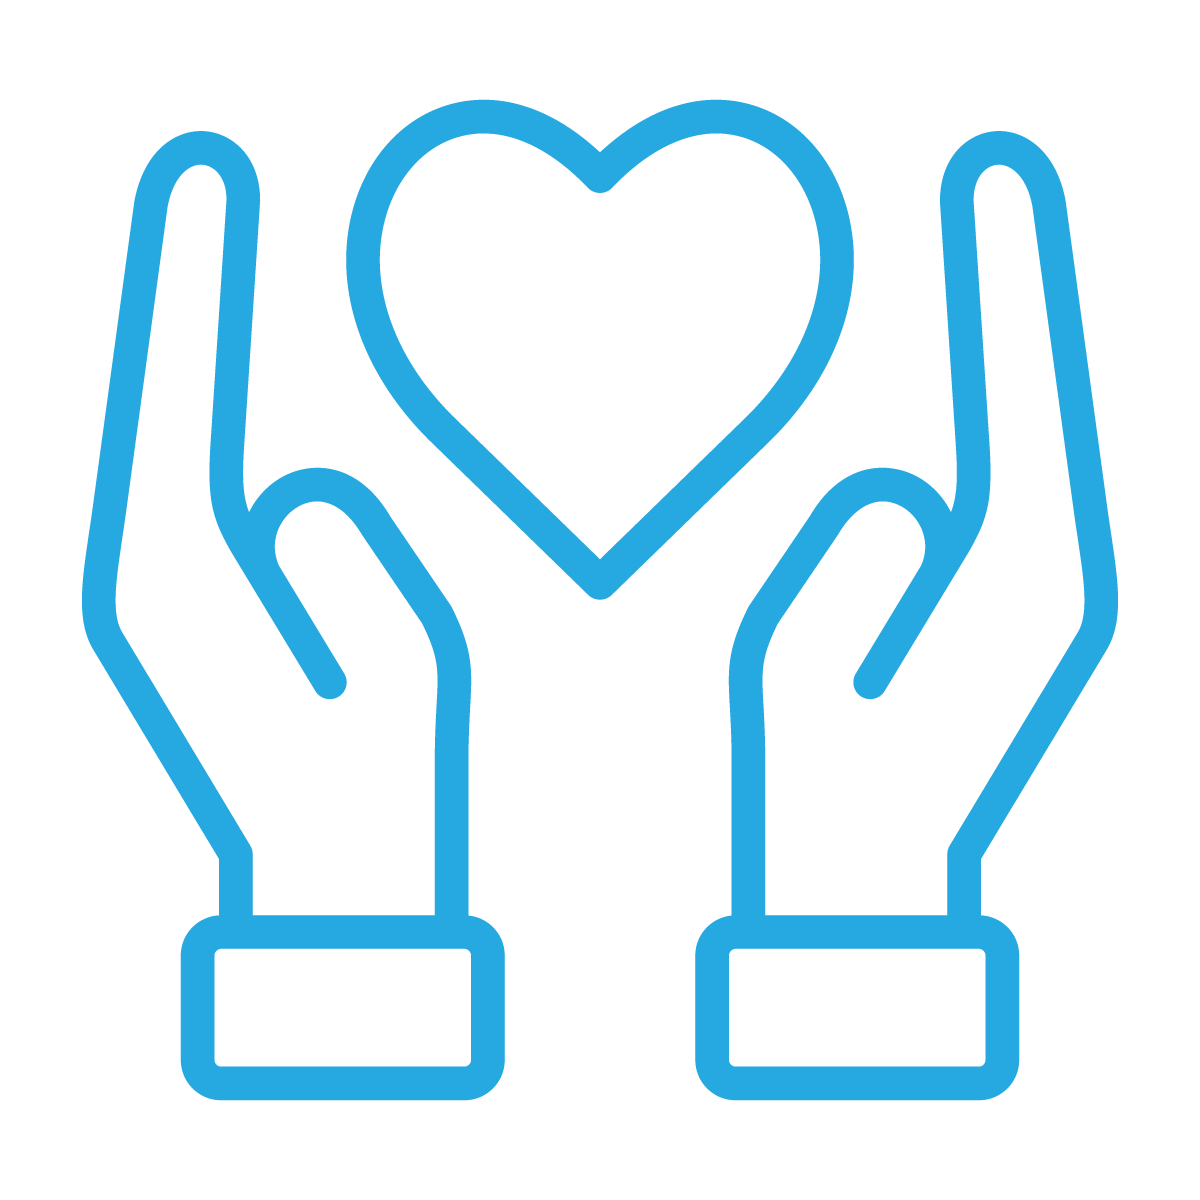 About two hands holding a heart icon on a white background.